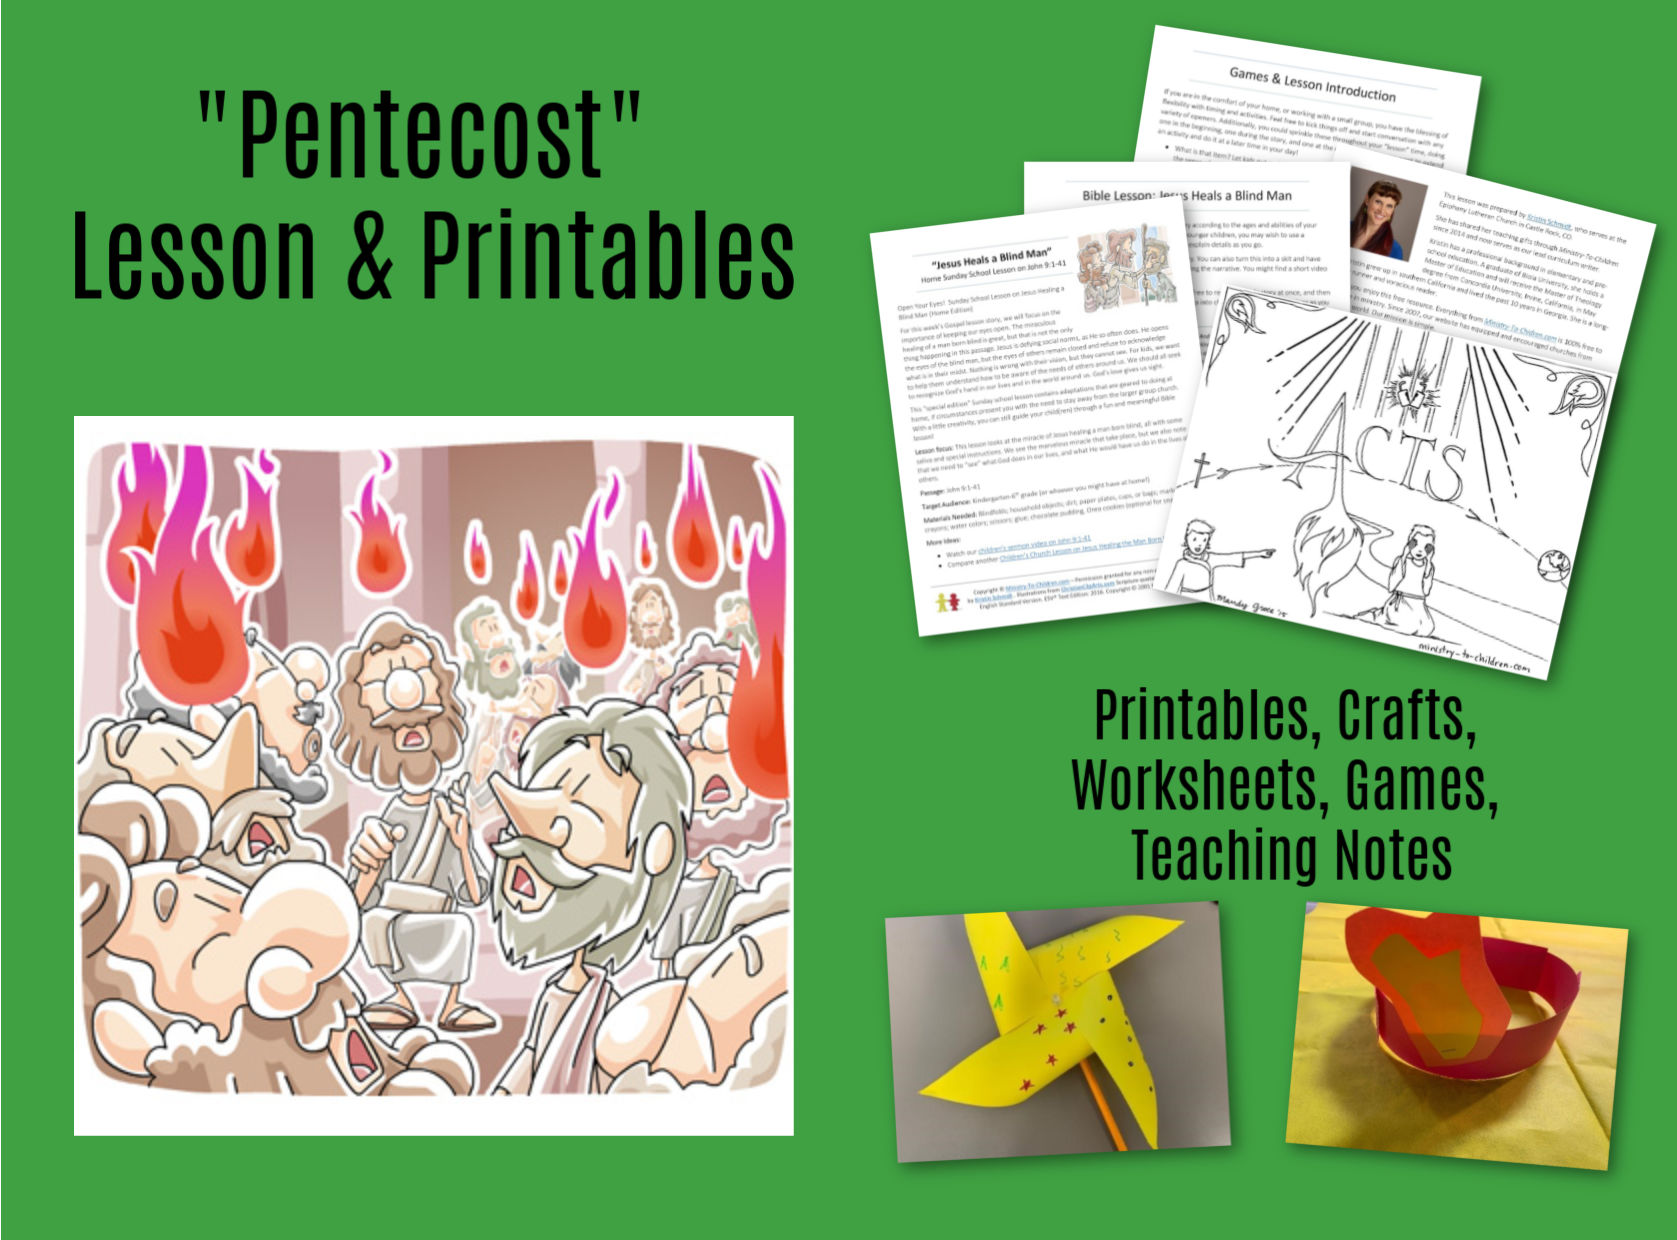 Pentecost Bible Study Lesson for Kids from Acts 2121 MinistryTo